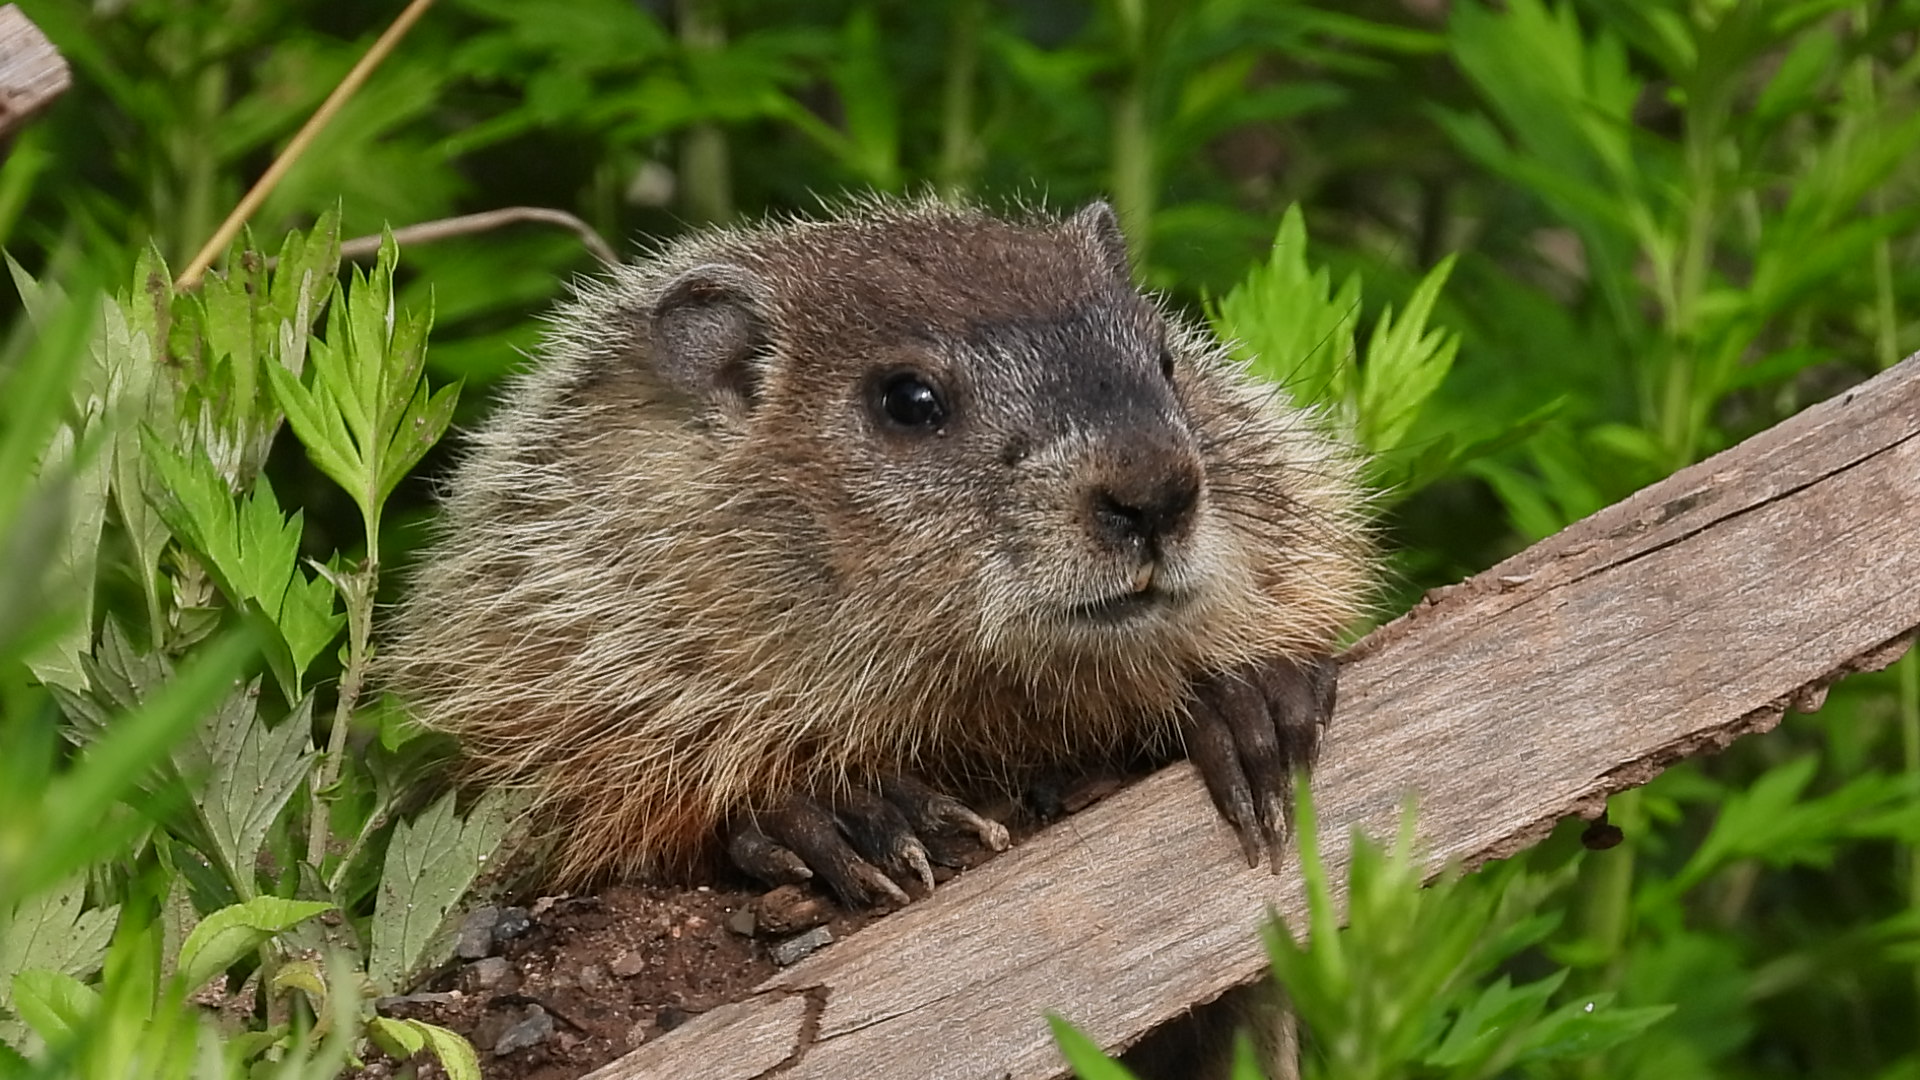 Baby woodchuck by minx267